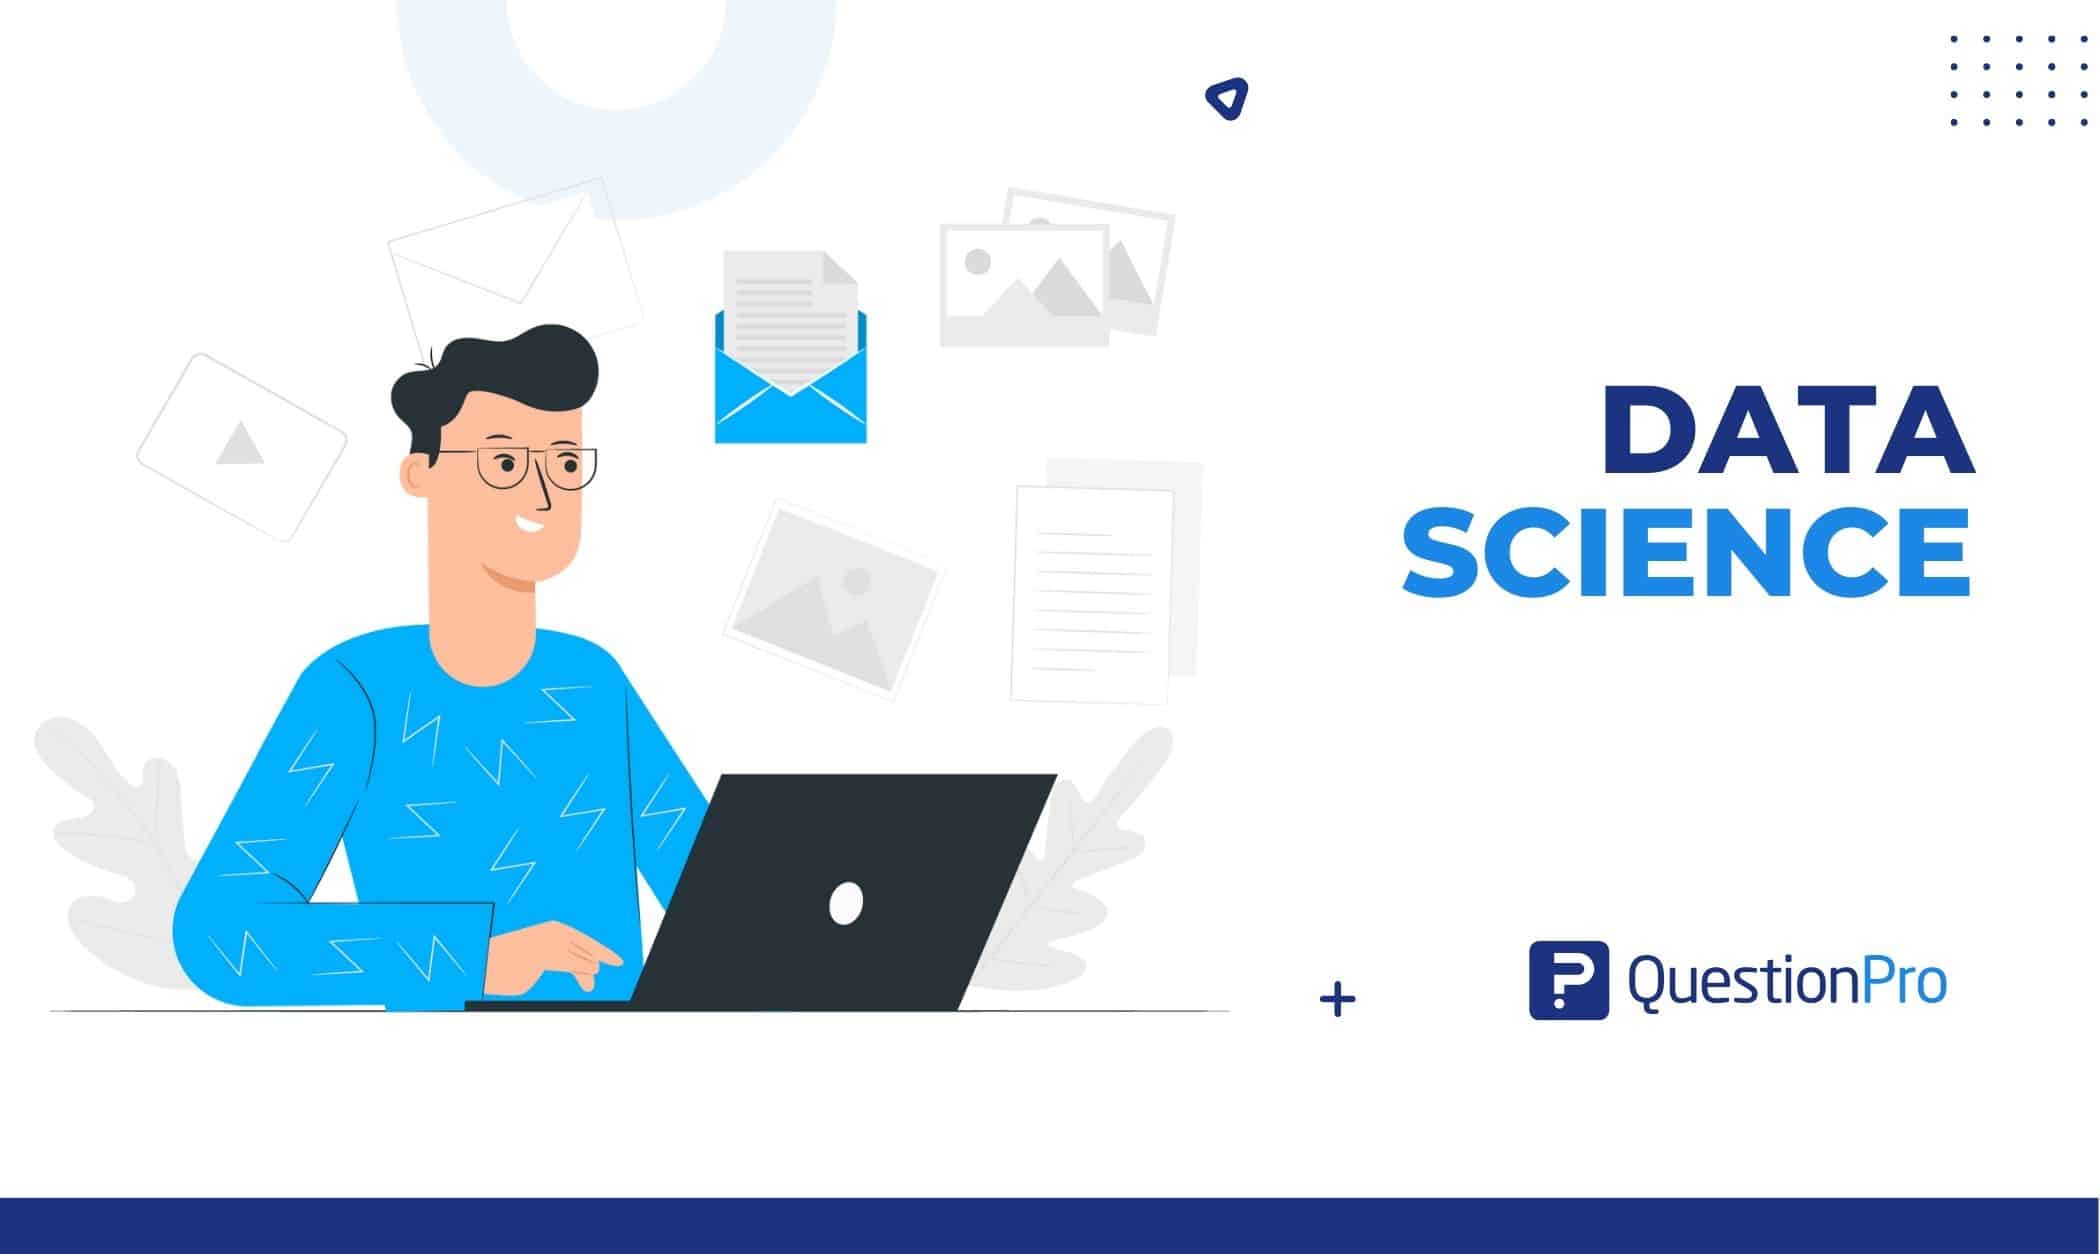 Data science analyzes structured and unstructured data using scientific methodologies. This lets data scientists answer important questions.